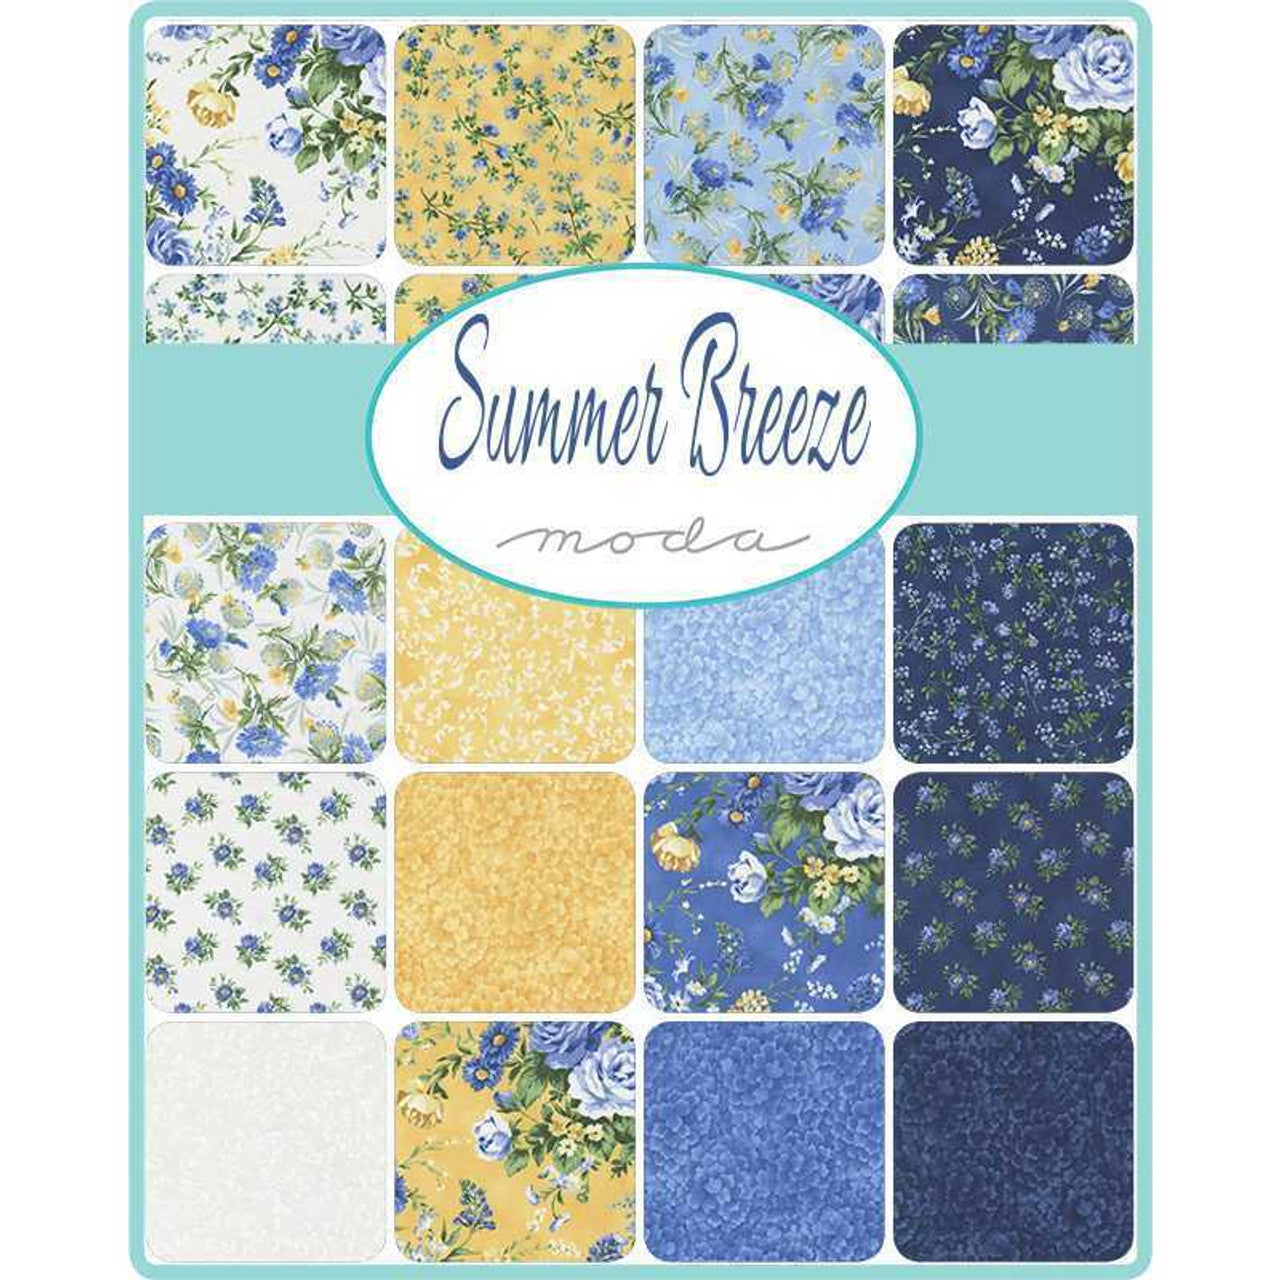 Summer Breeze Charm Pack by Moda